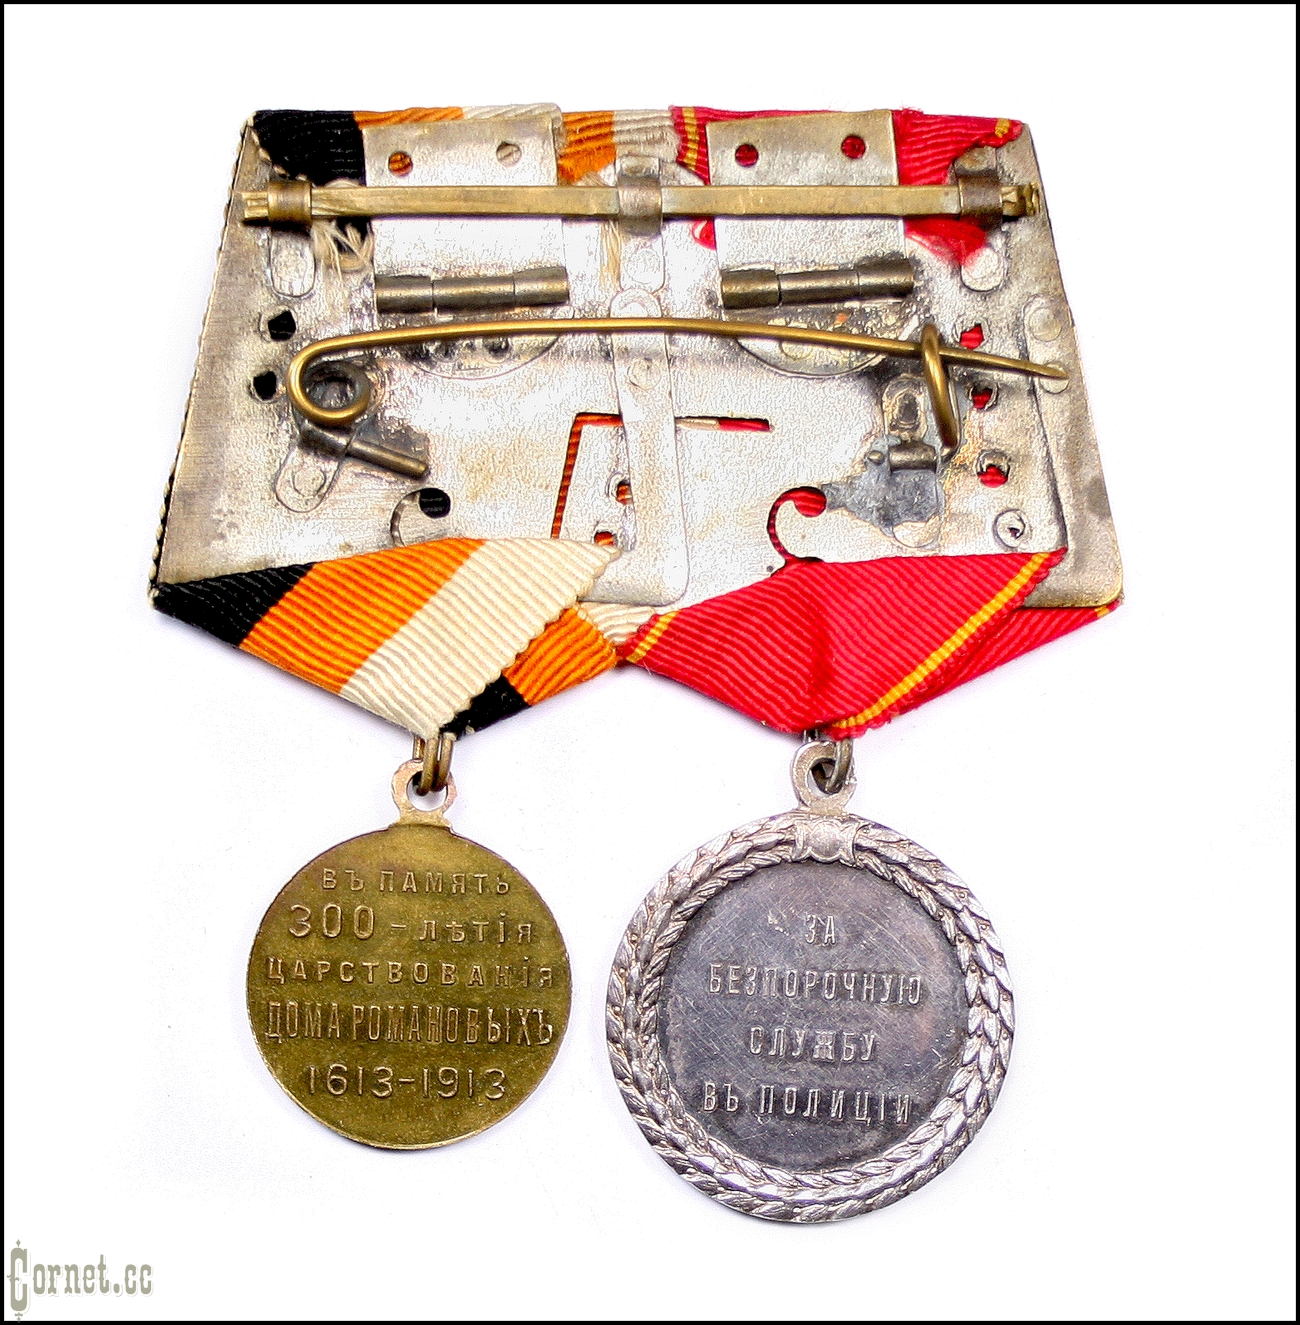 Awards of a policeman of the Russian Empire